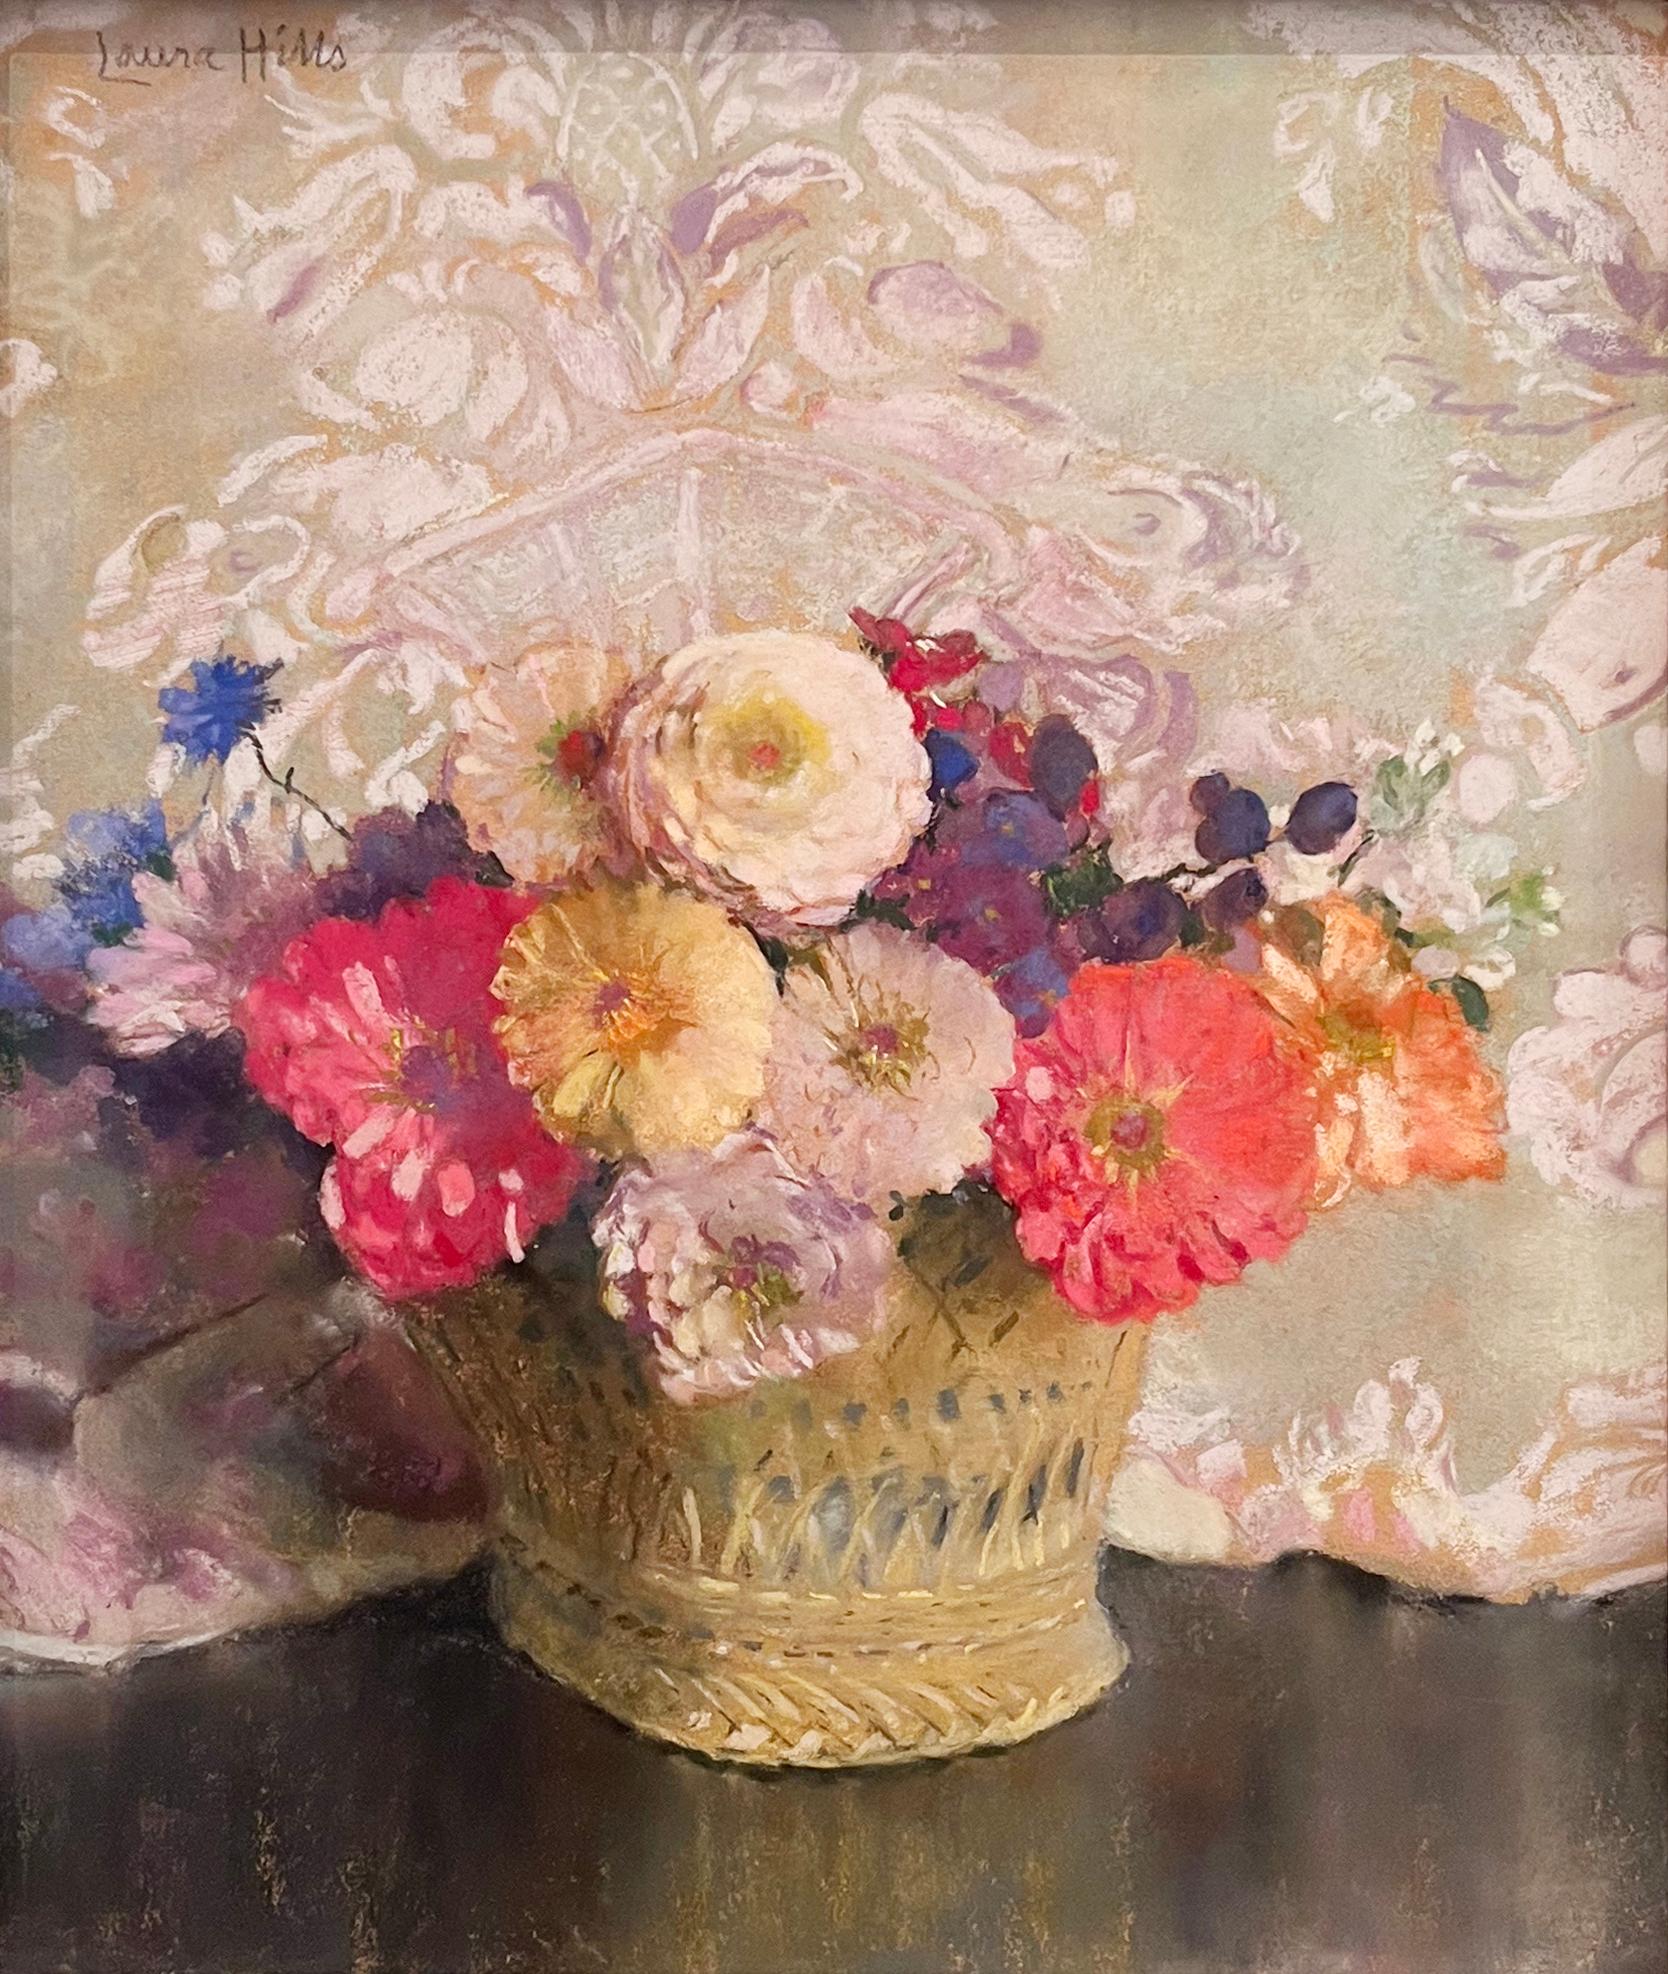 Basket of Flowers - Art by Laura Coombs Hills